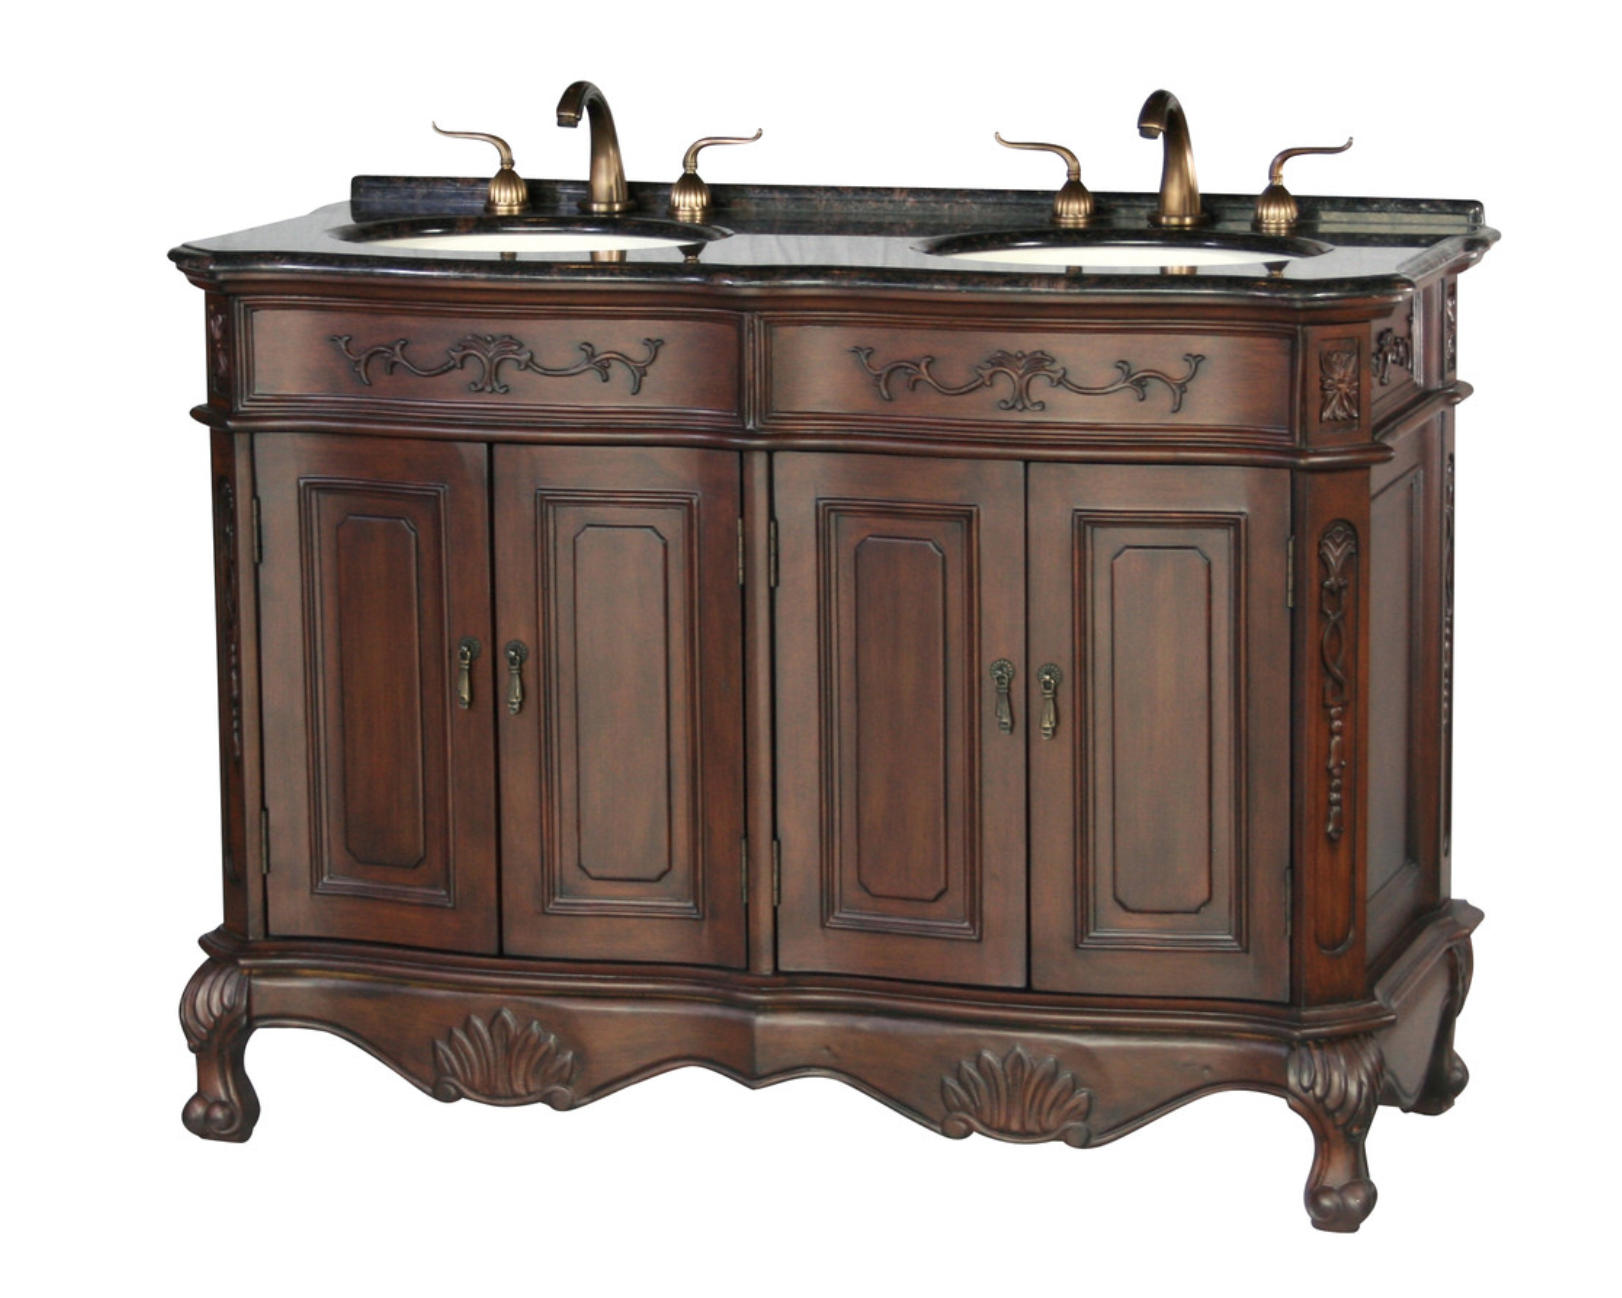 50" Adelina Antique Style Double Sink Bathroom Vanity in Walnut Wooden Cabinet Finish with Dark Coral Brown Granite Countertop